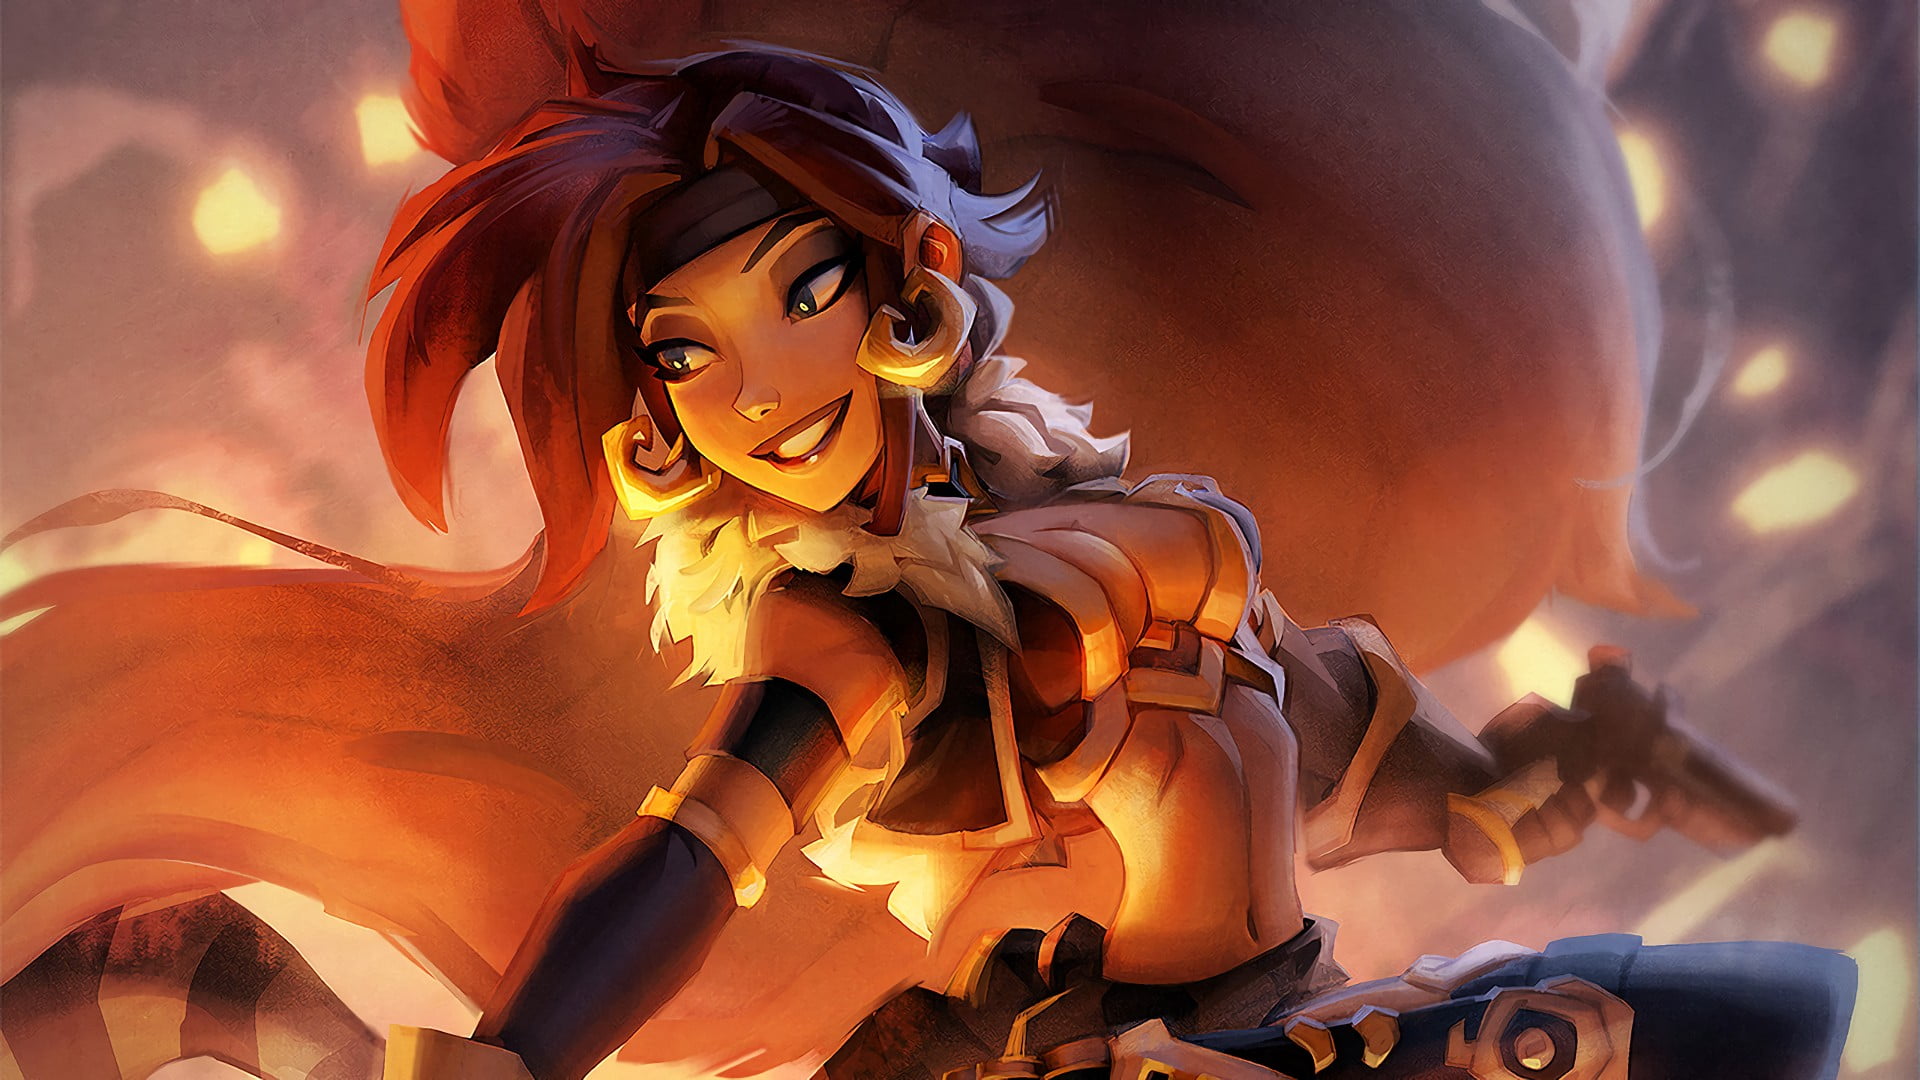 brown-haired female character, fantasy art, Battle Chasers, digital art, happy